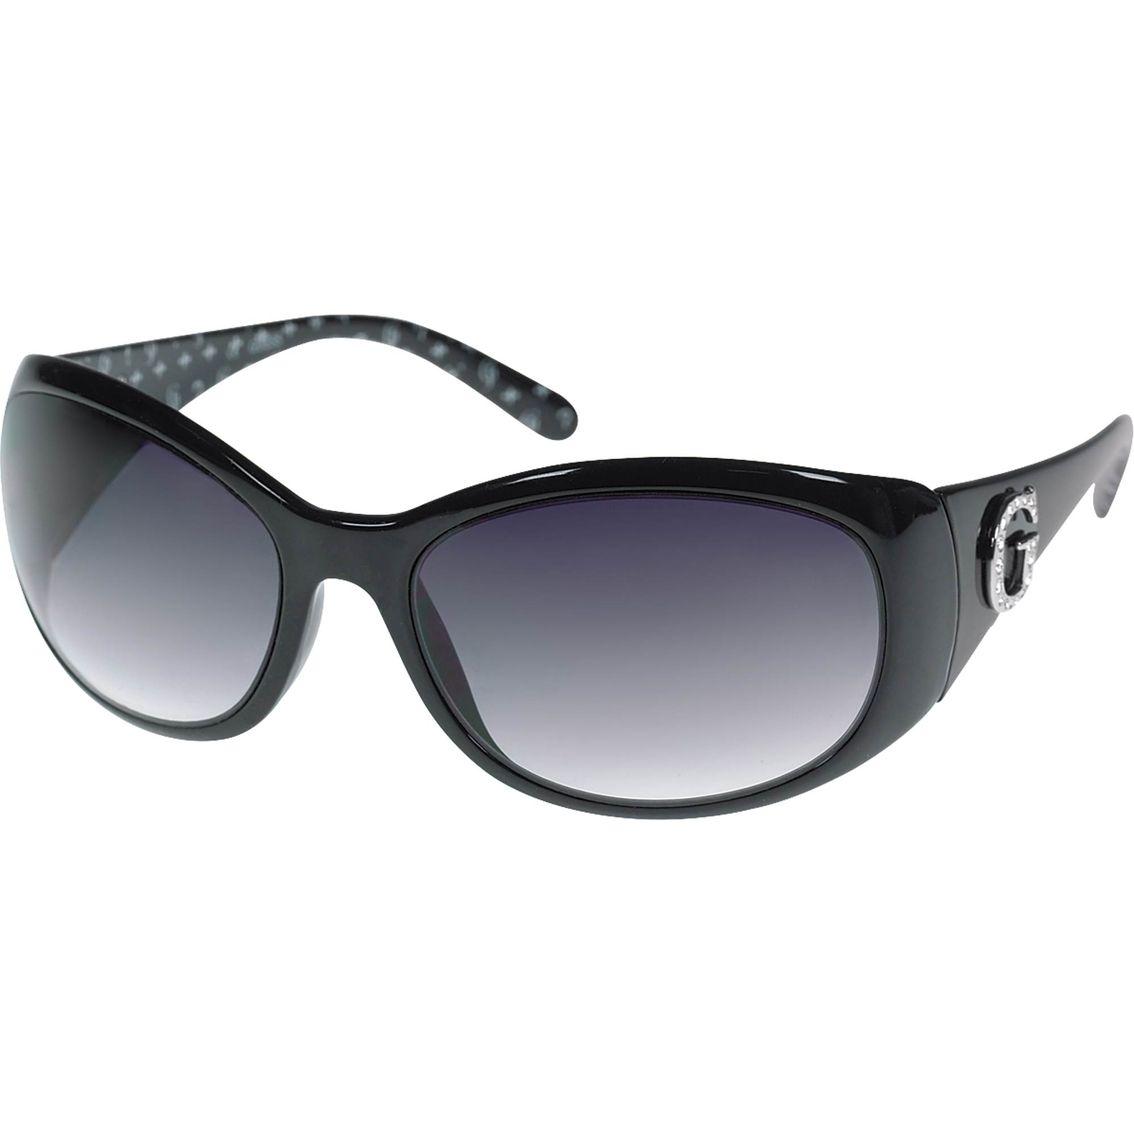 Guess G Logo - Guess Oval Frame Sunglasses With Guess G Logo. Women's Sunglasses